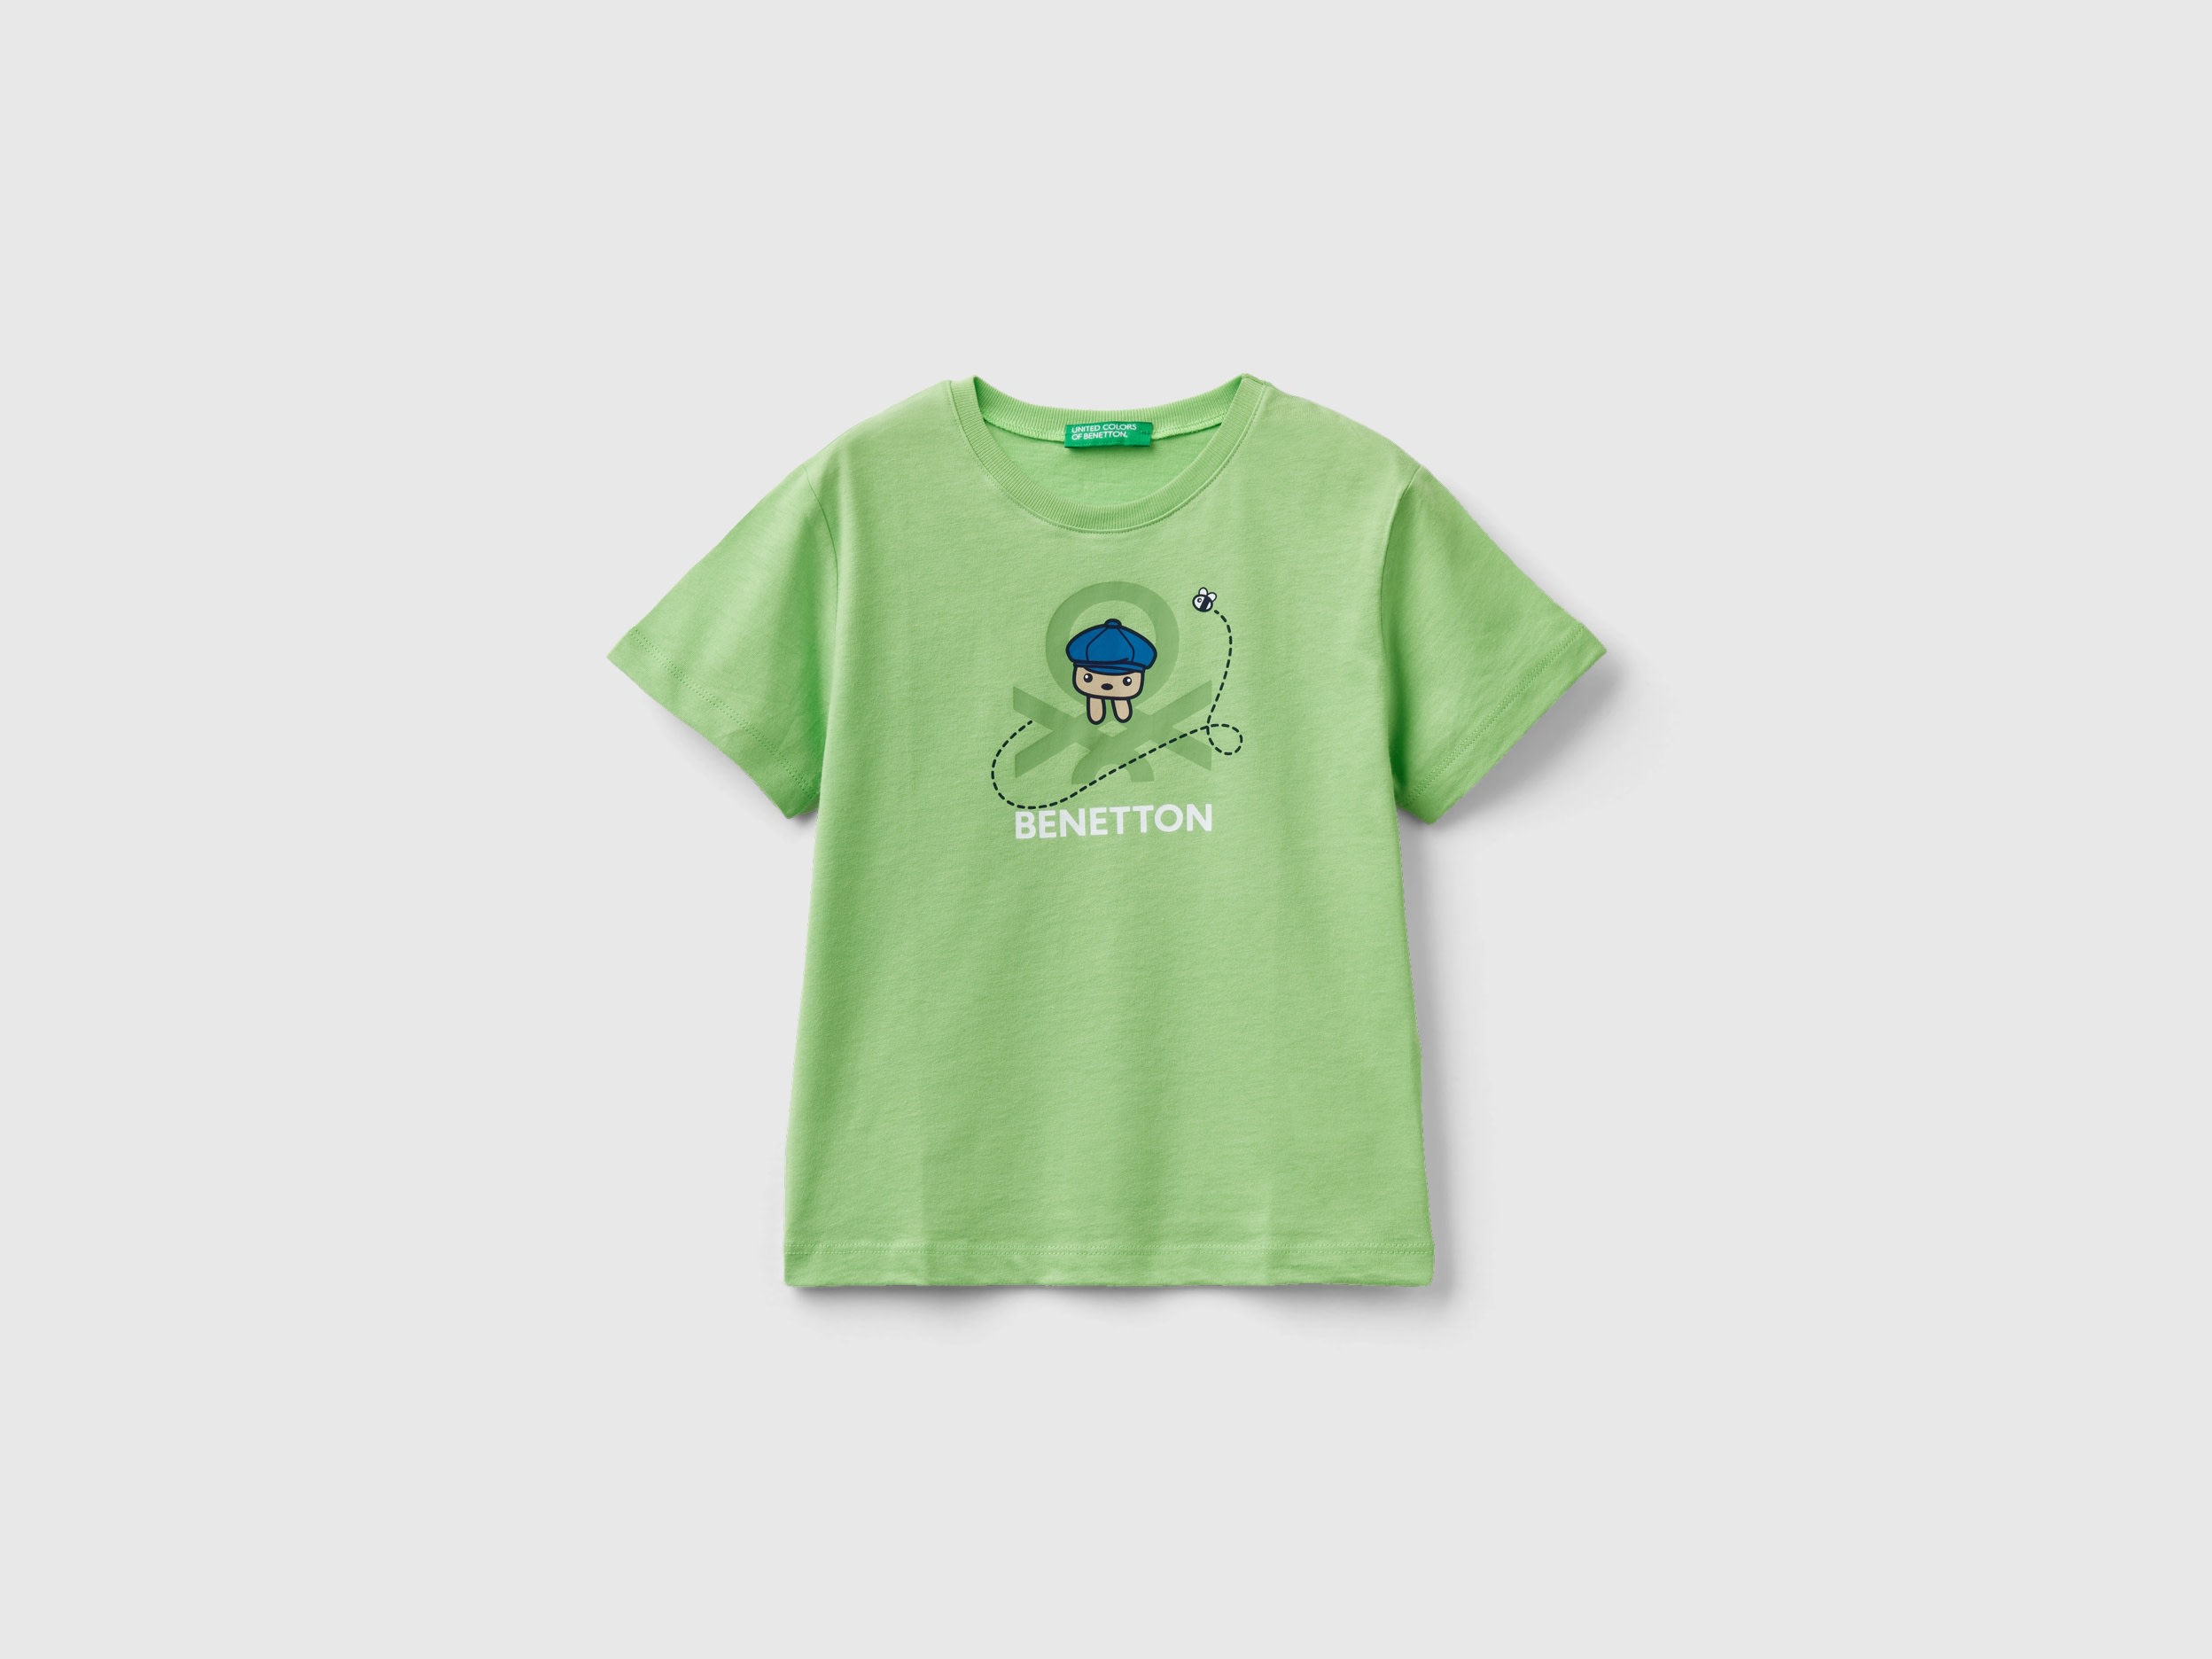 Benetton, T-shirt With Print In 100% Organic Cotton, size 3-4, Light Green, Kids